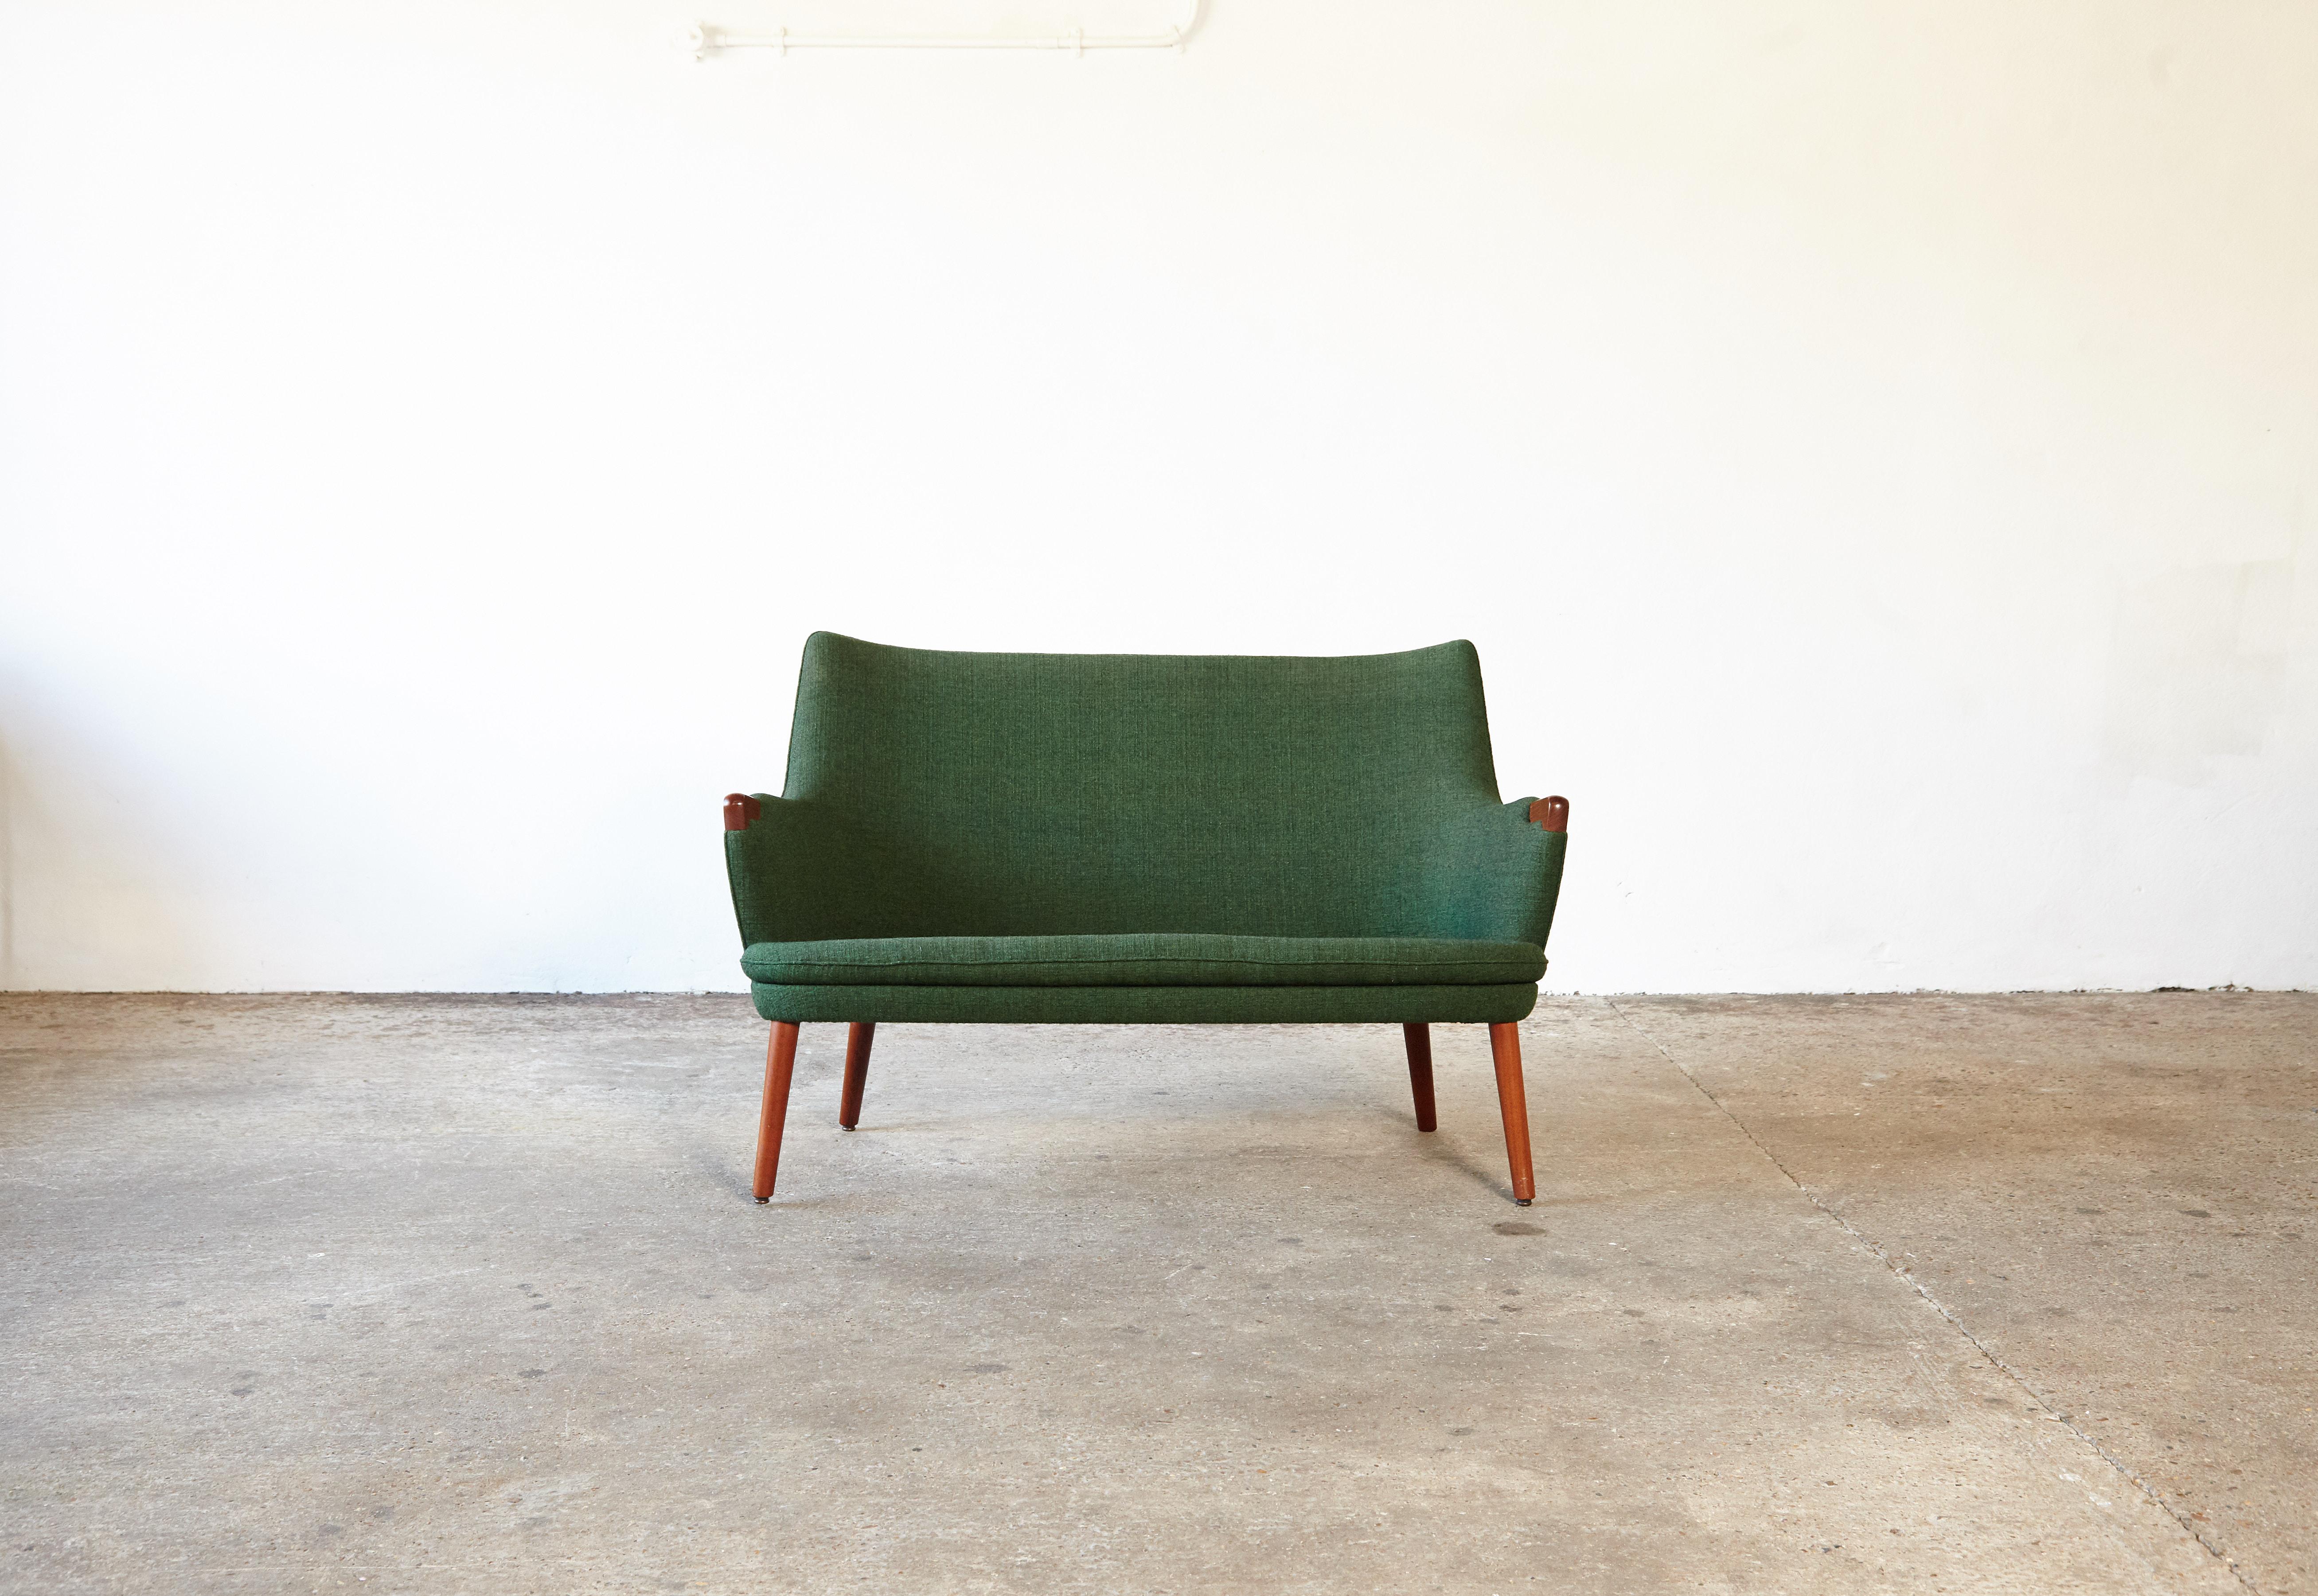 Hans Wegner AP 20 sofa, original fabric, manufactured by A.P. Stolen in Denmark, 1950s-1960s. In original condition with makers mark. Structurally sound, teak frame with some light marks, and original fabric with minor signs of use and minor wear. 